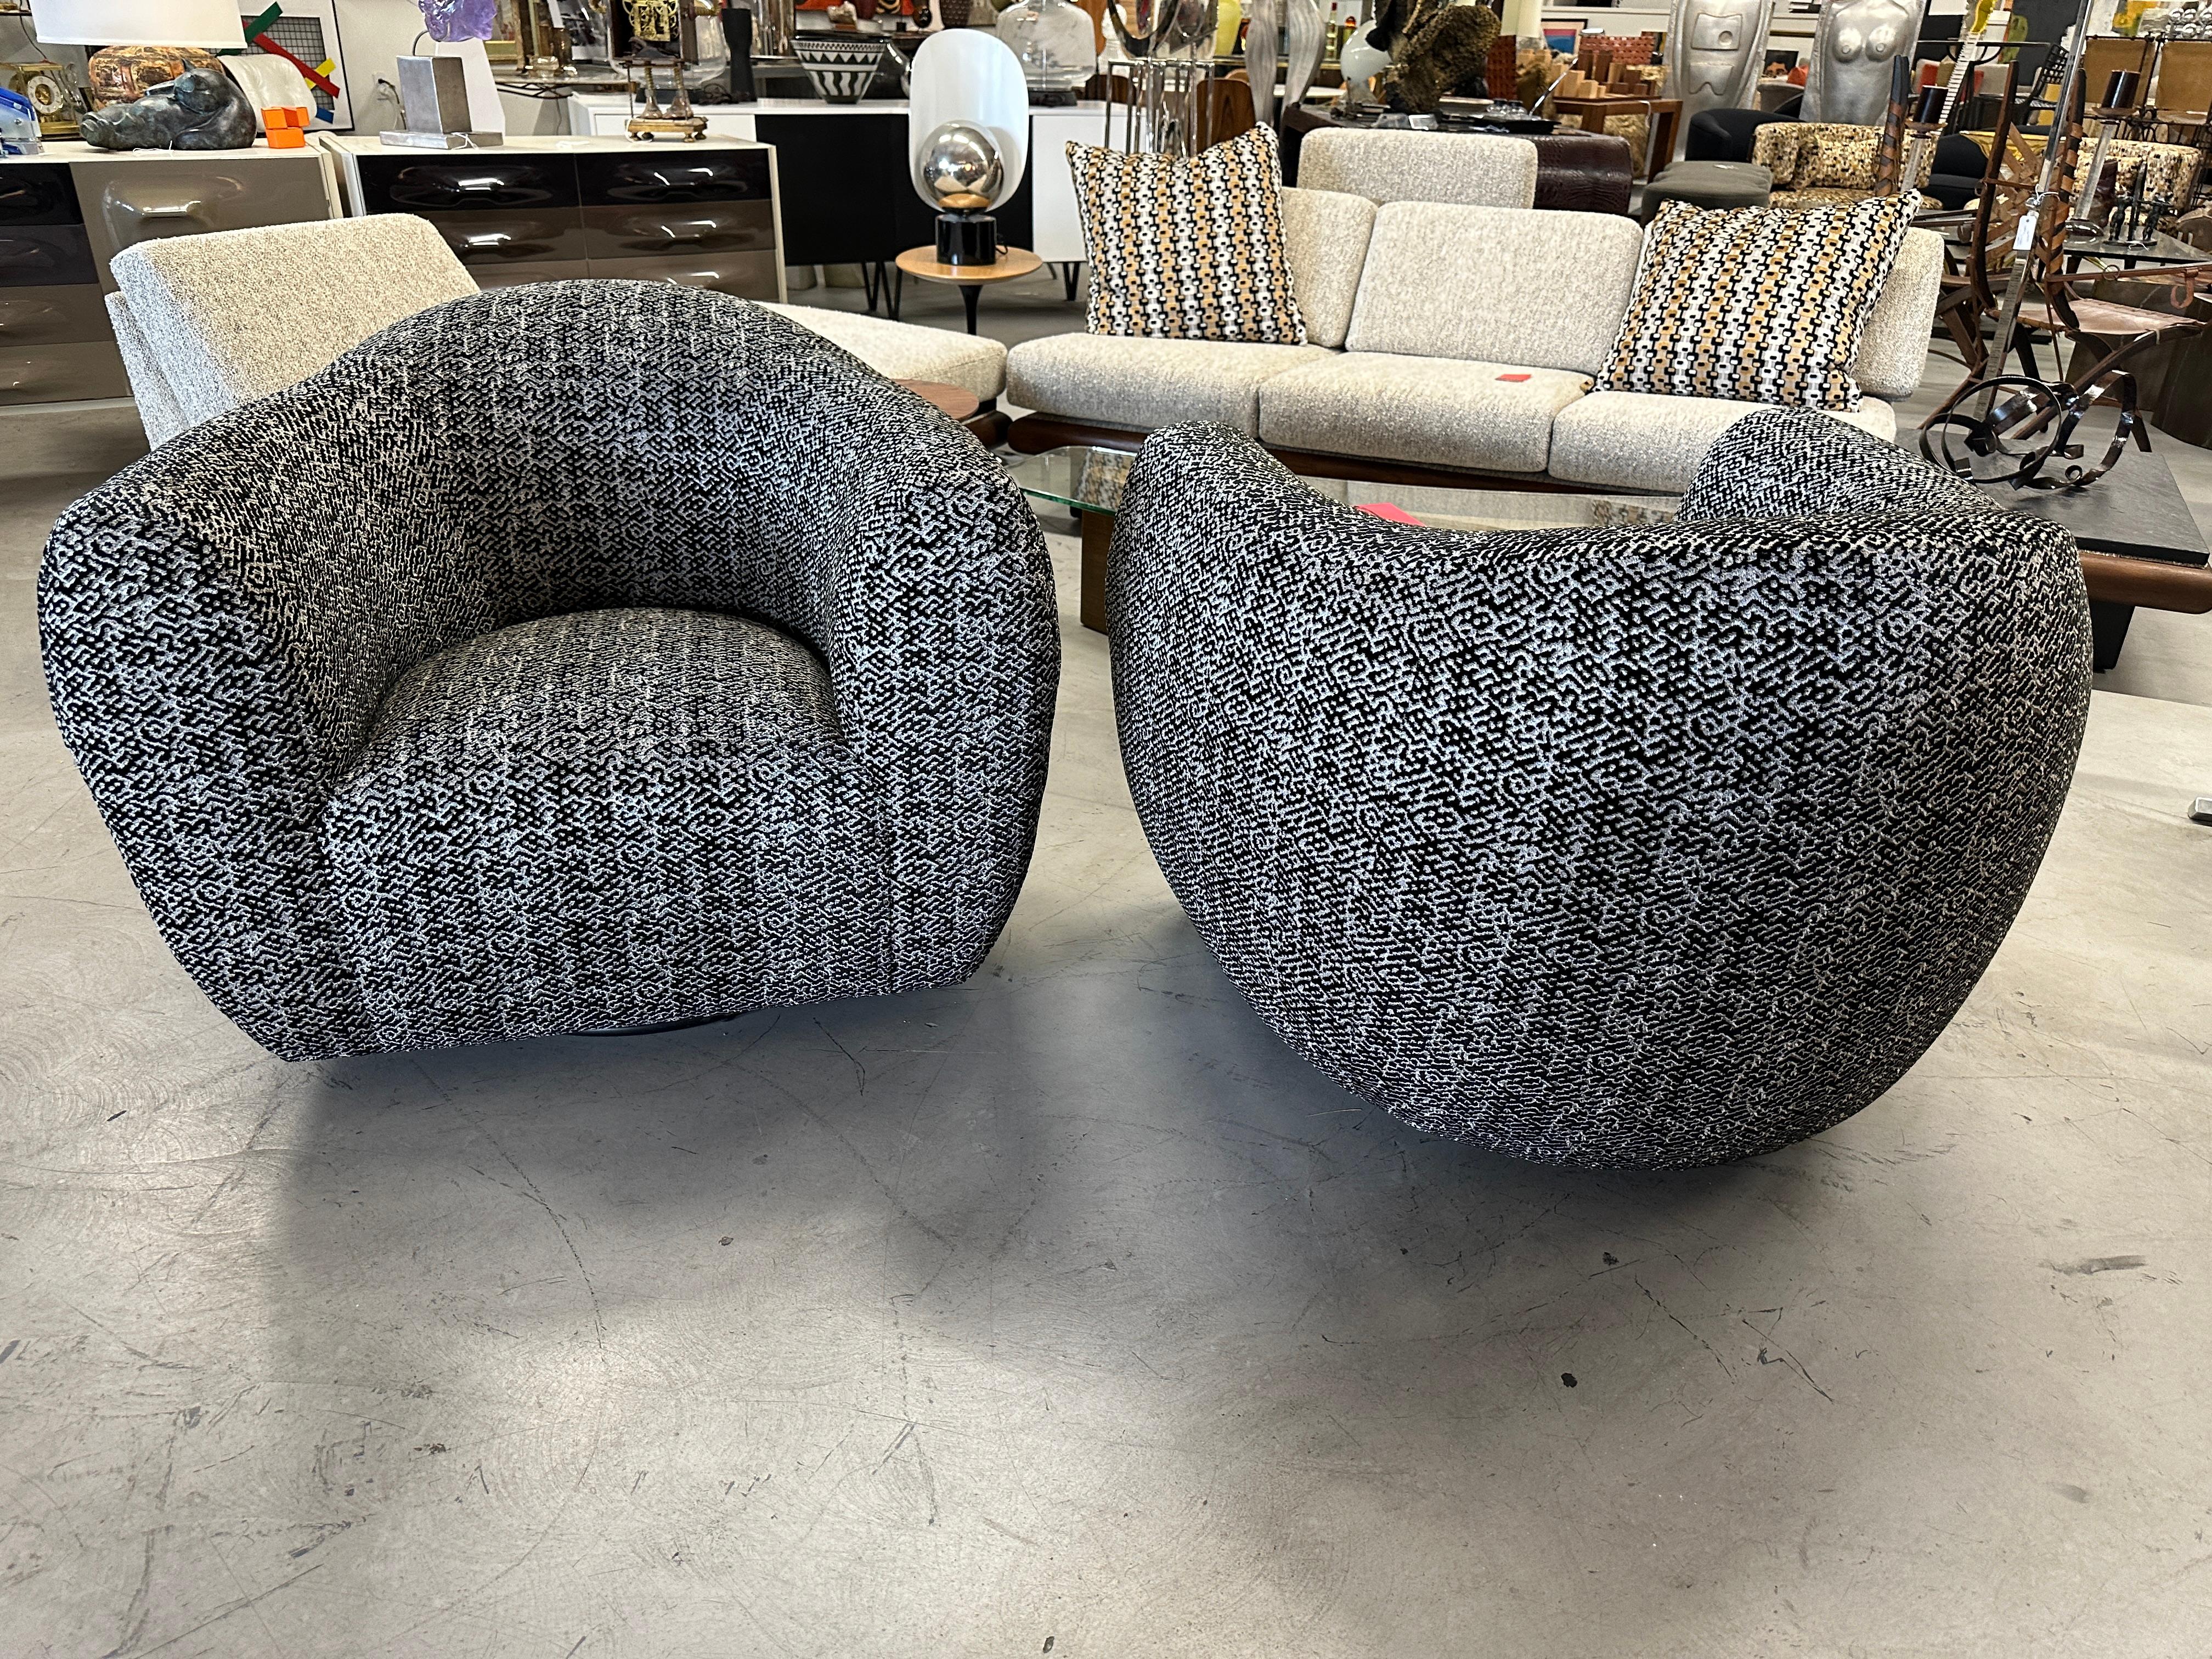 A running pair of oversized barrel swivel chairs from the 1980’s we’ve had totally redone in a beautiful cut velvet fabric by Pollack Weitzner called Precipice in the Phantom colorway.  The swivel bases have even been replaced and there are